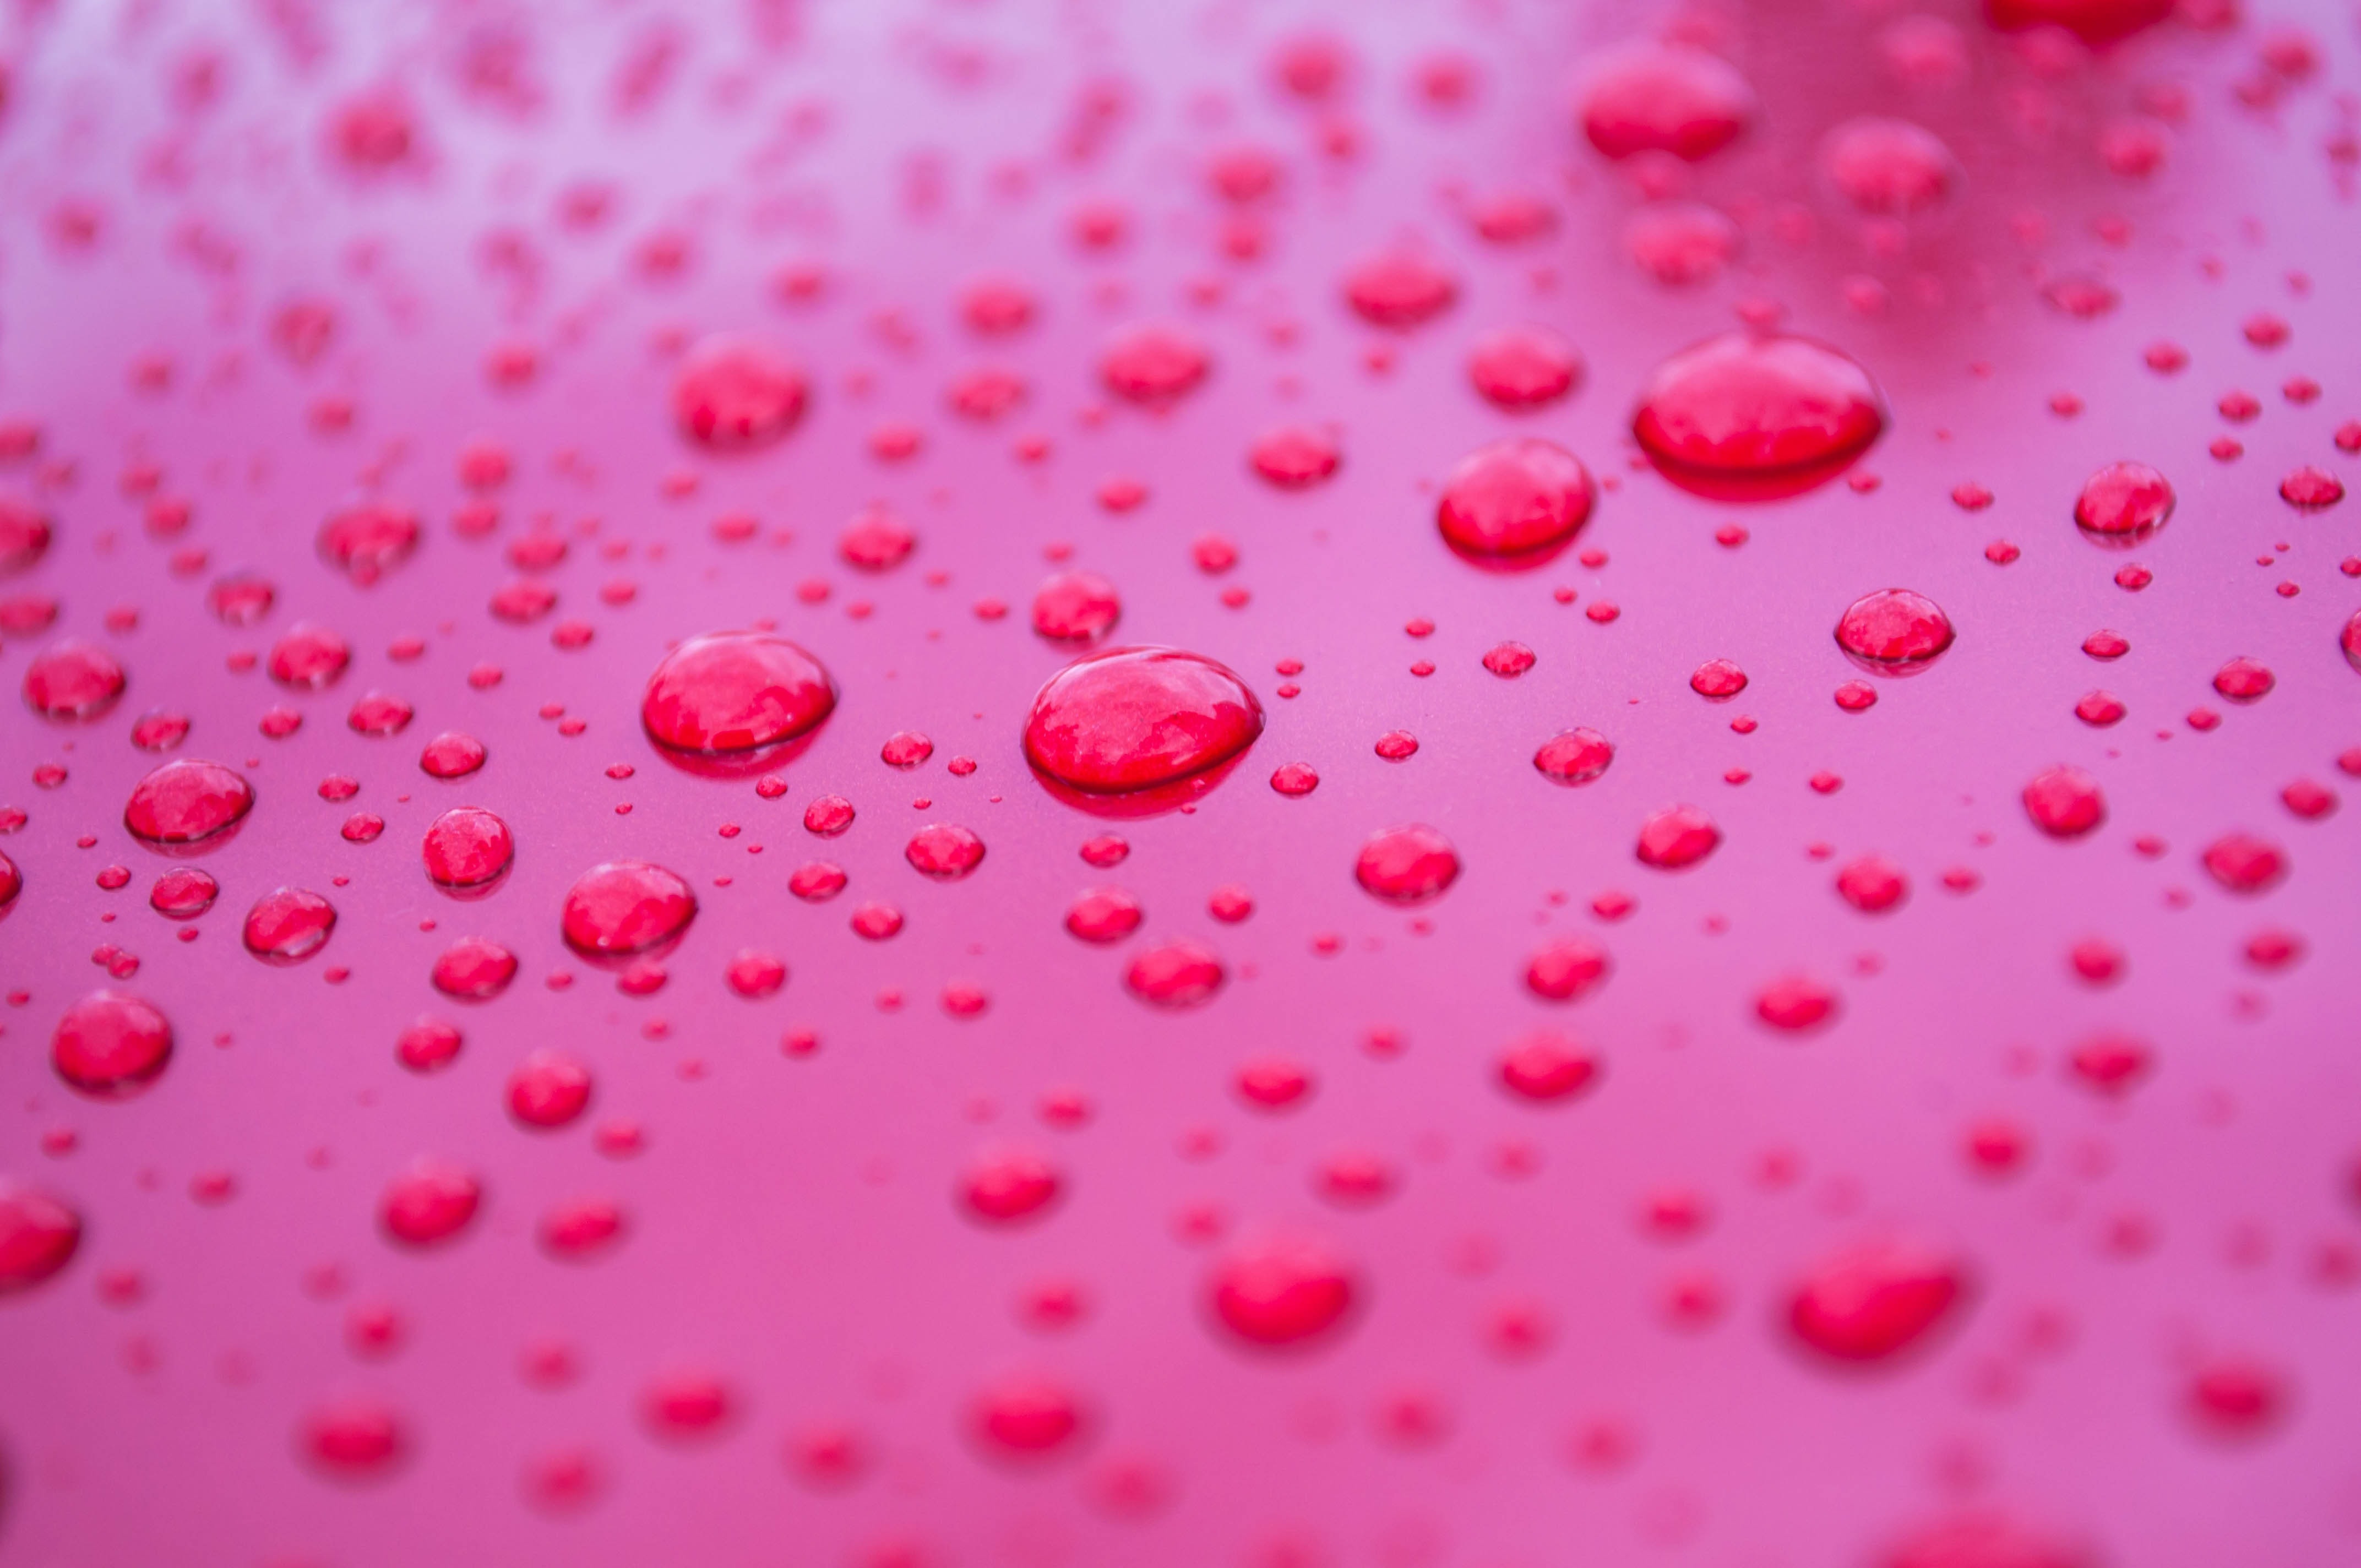 drops of water on red surface